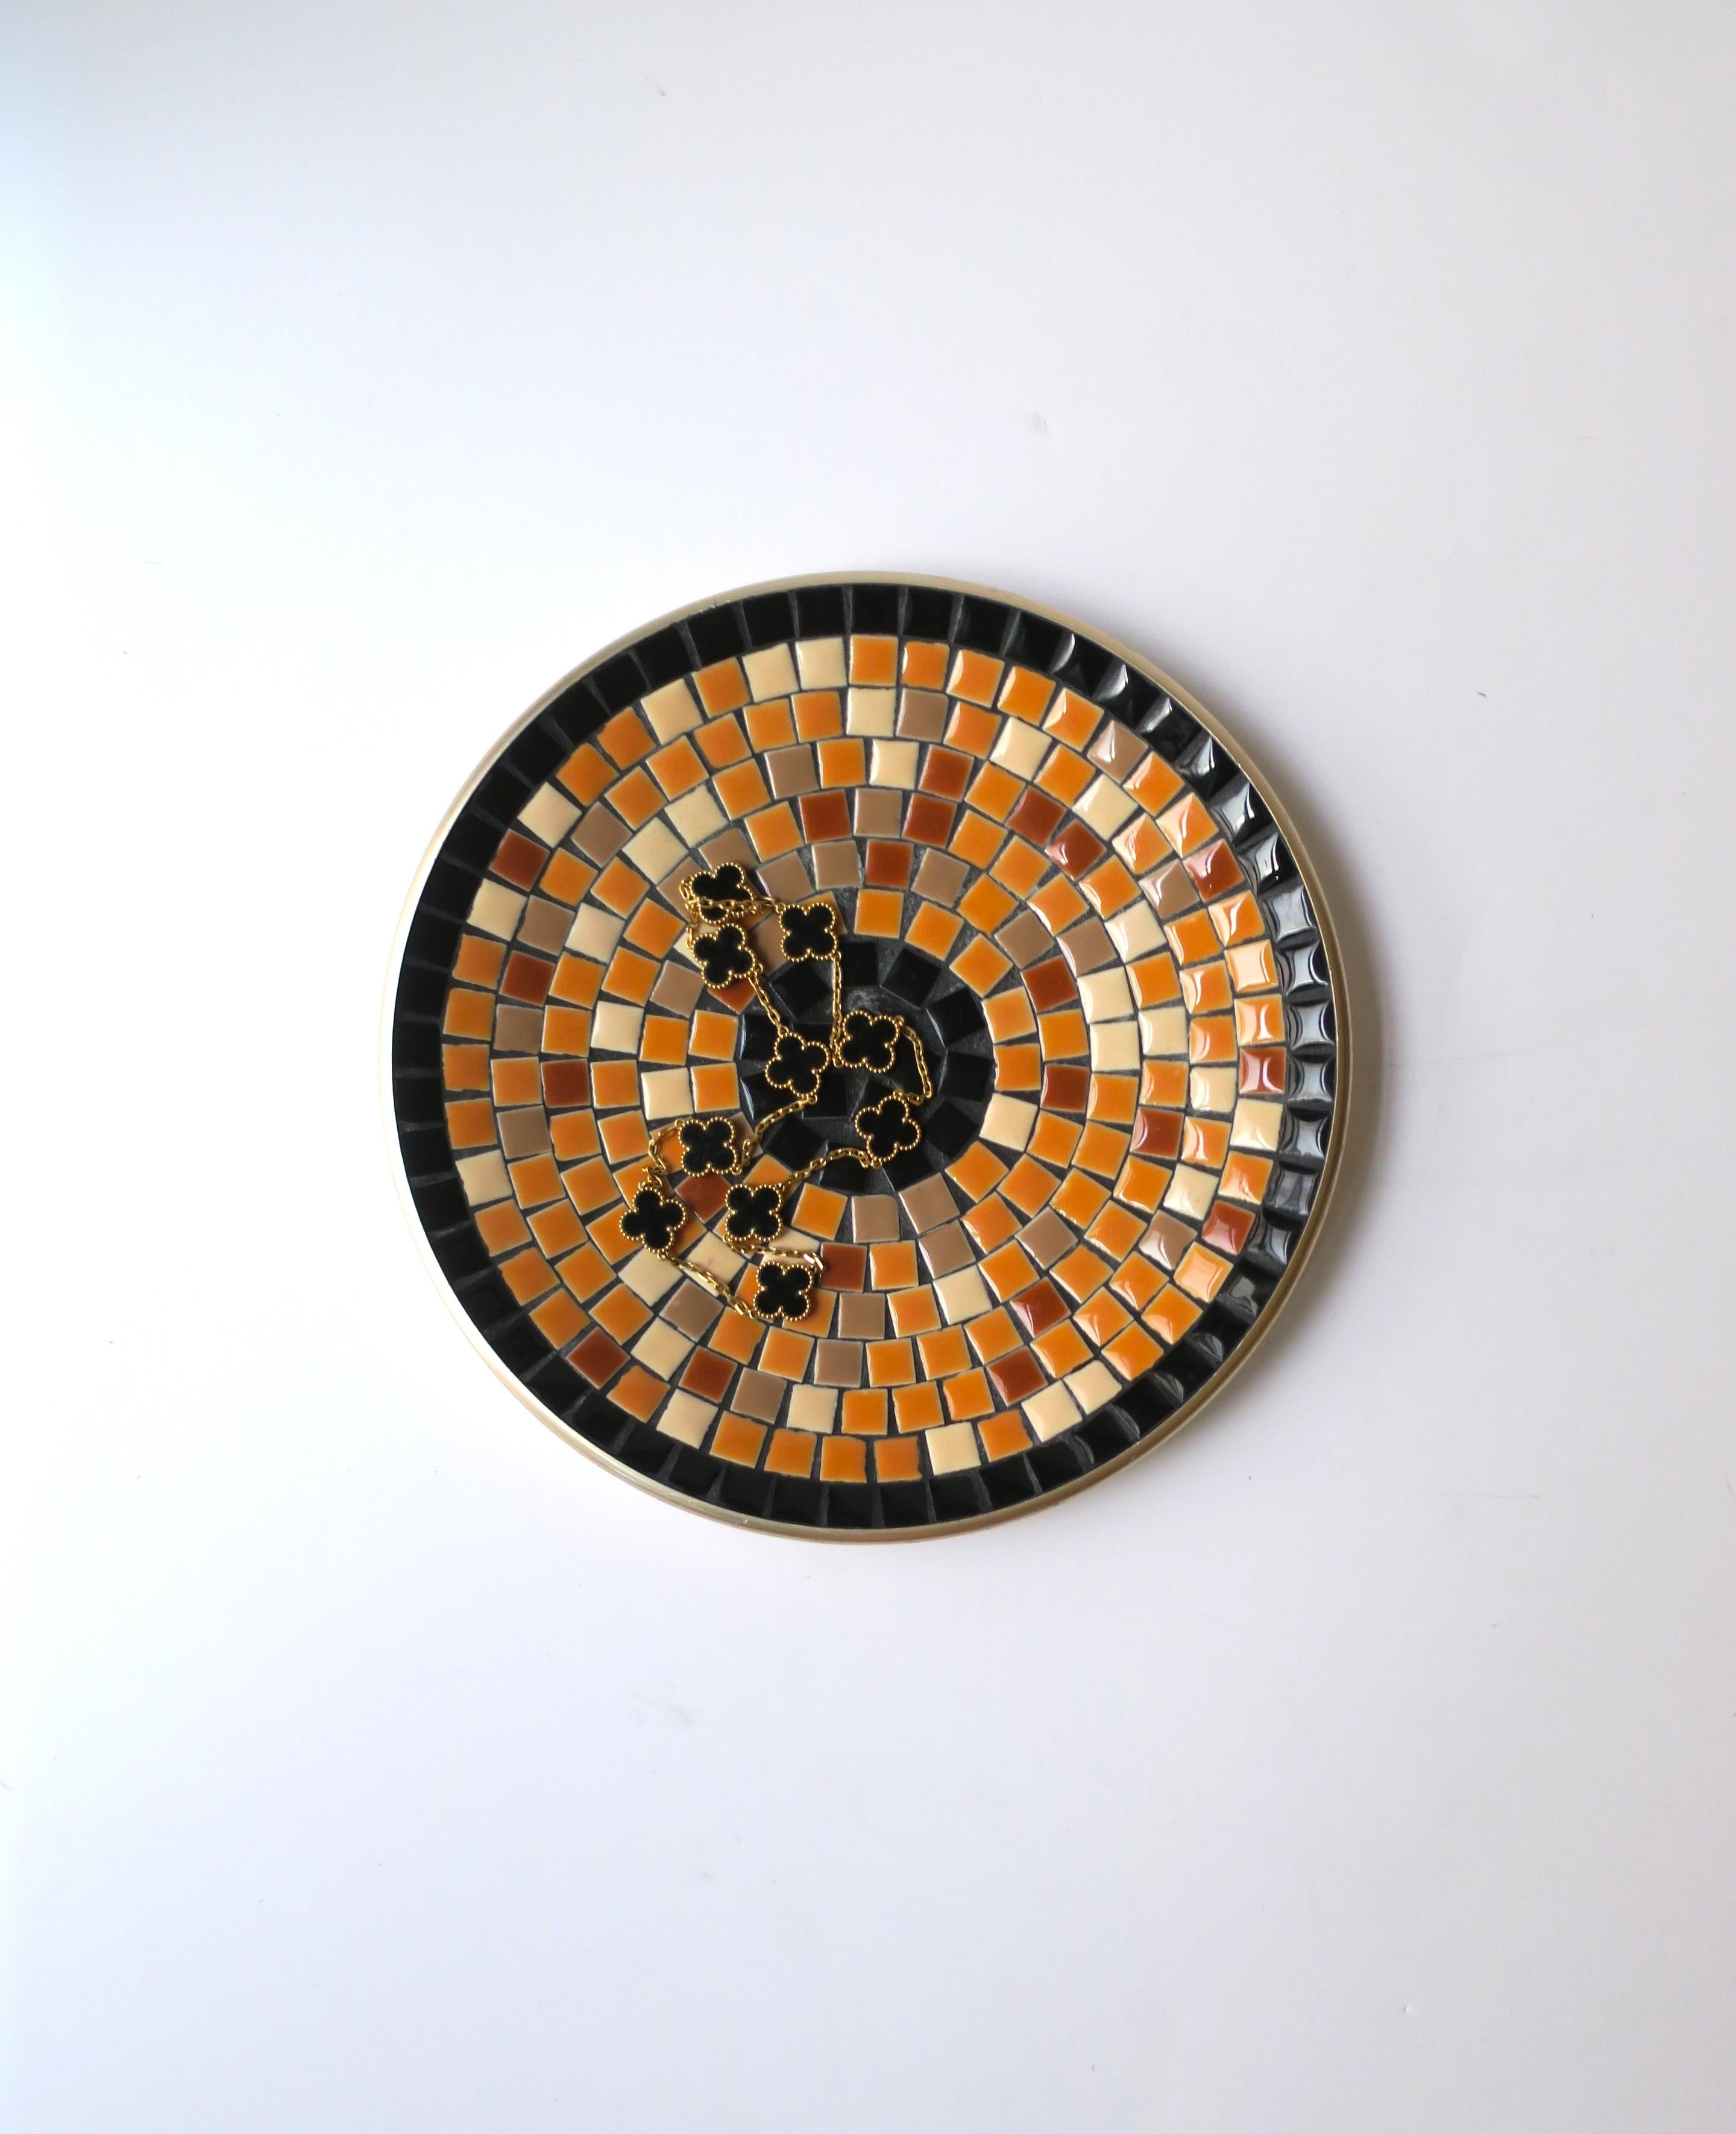 Unknown Mosaic Ceramic Tile Dish Vide-Poche Catchall Black and Terracotta, circa 1960s For Sale